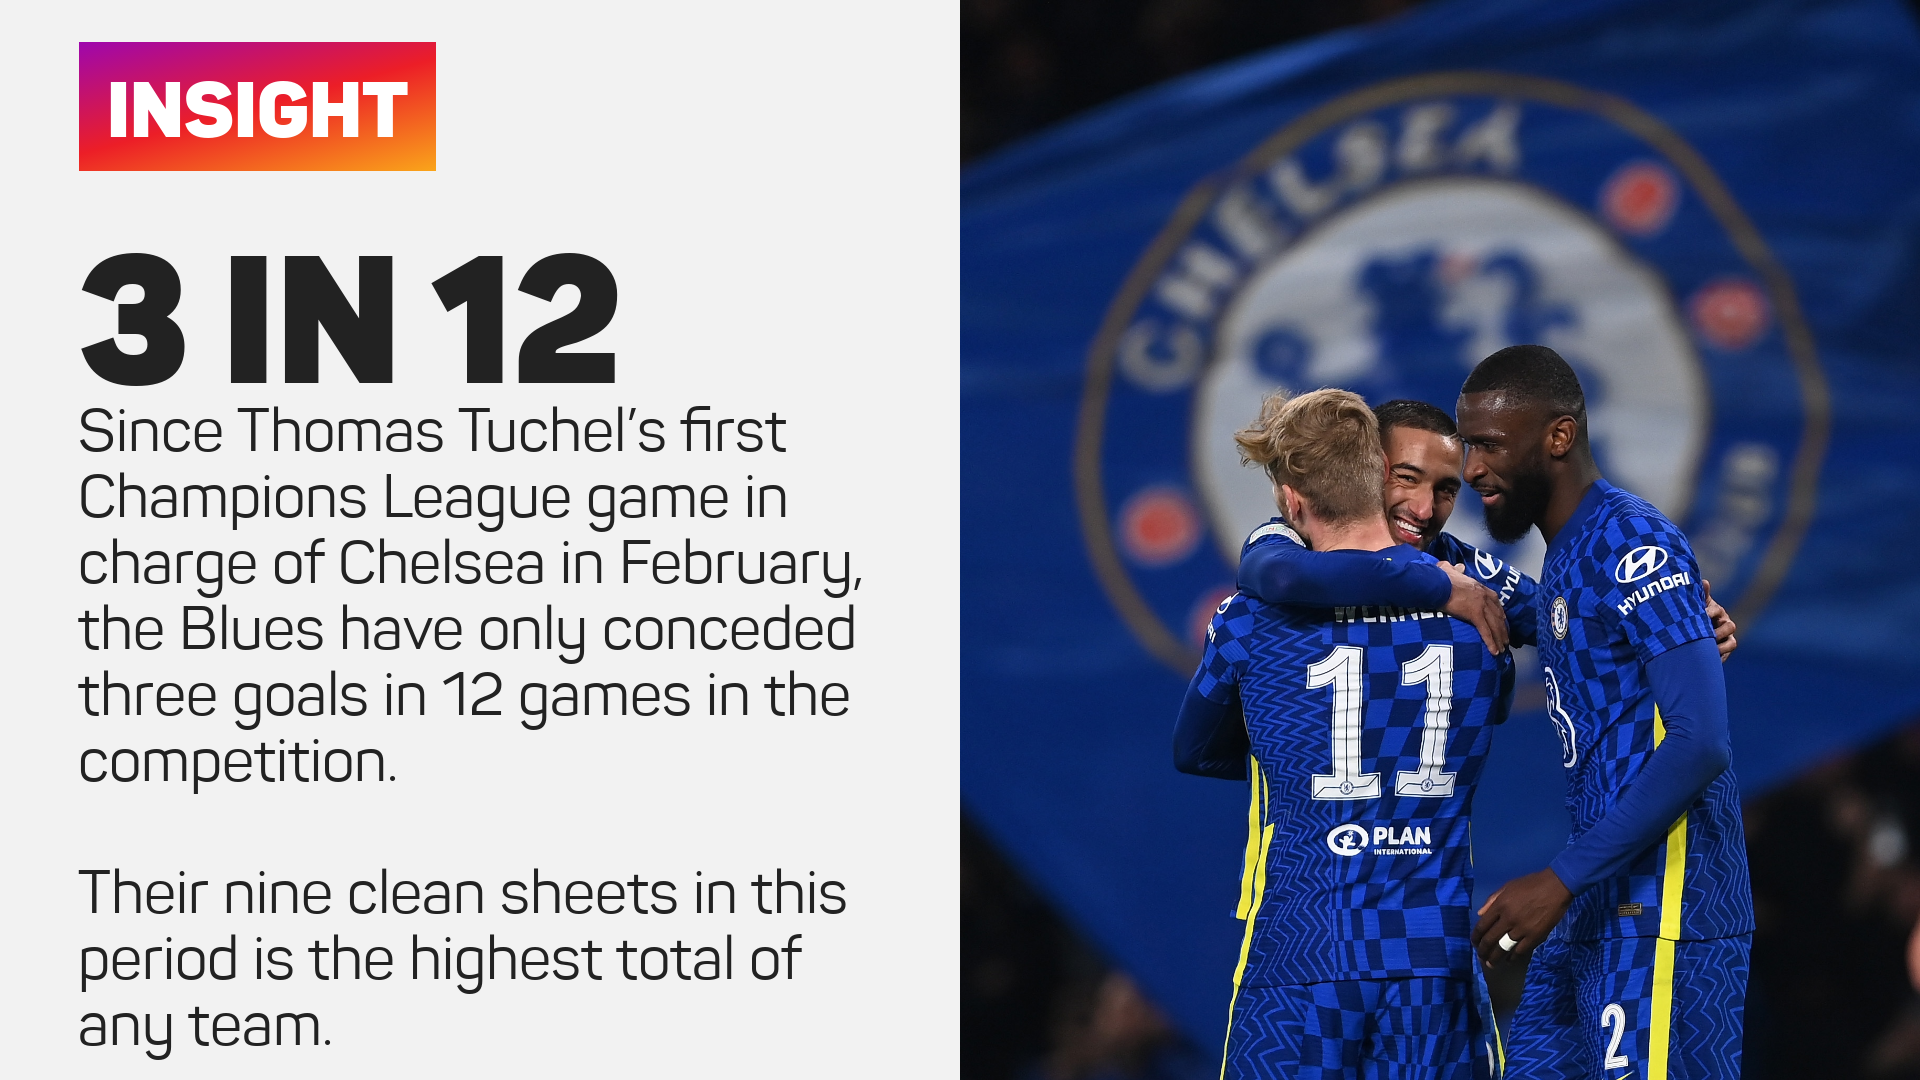 Chelsea have conceded just three goals in 12 Champions League games under Thomas Tuchel